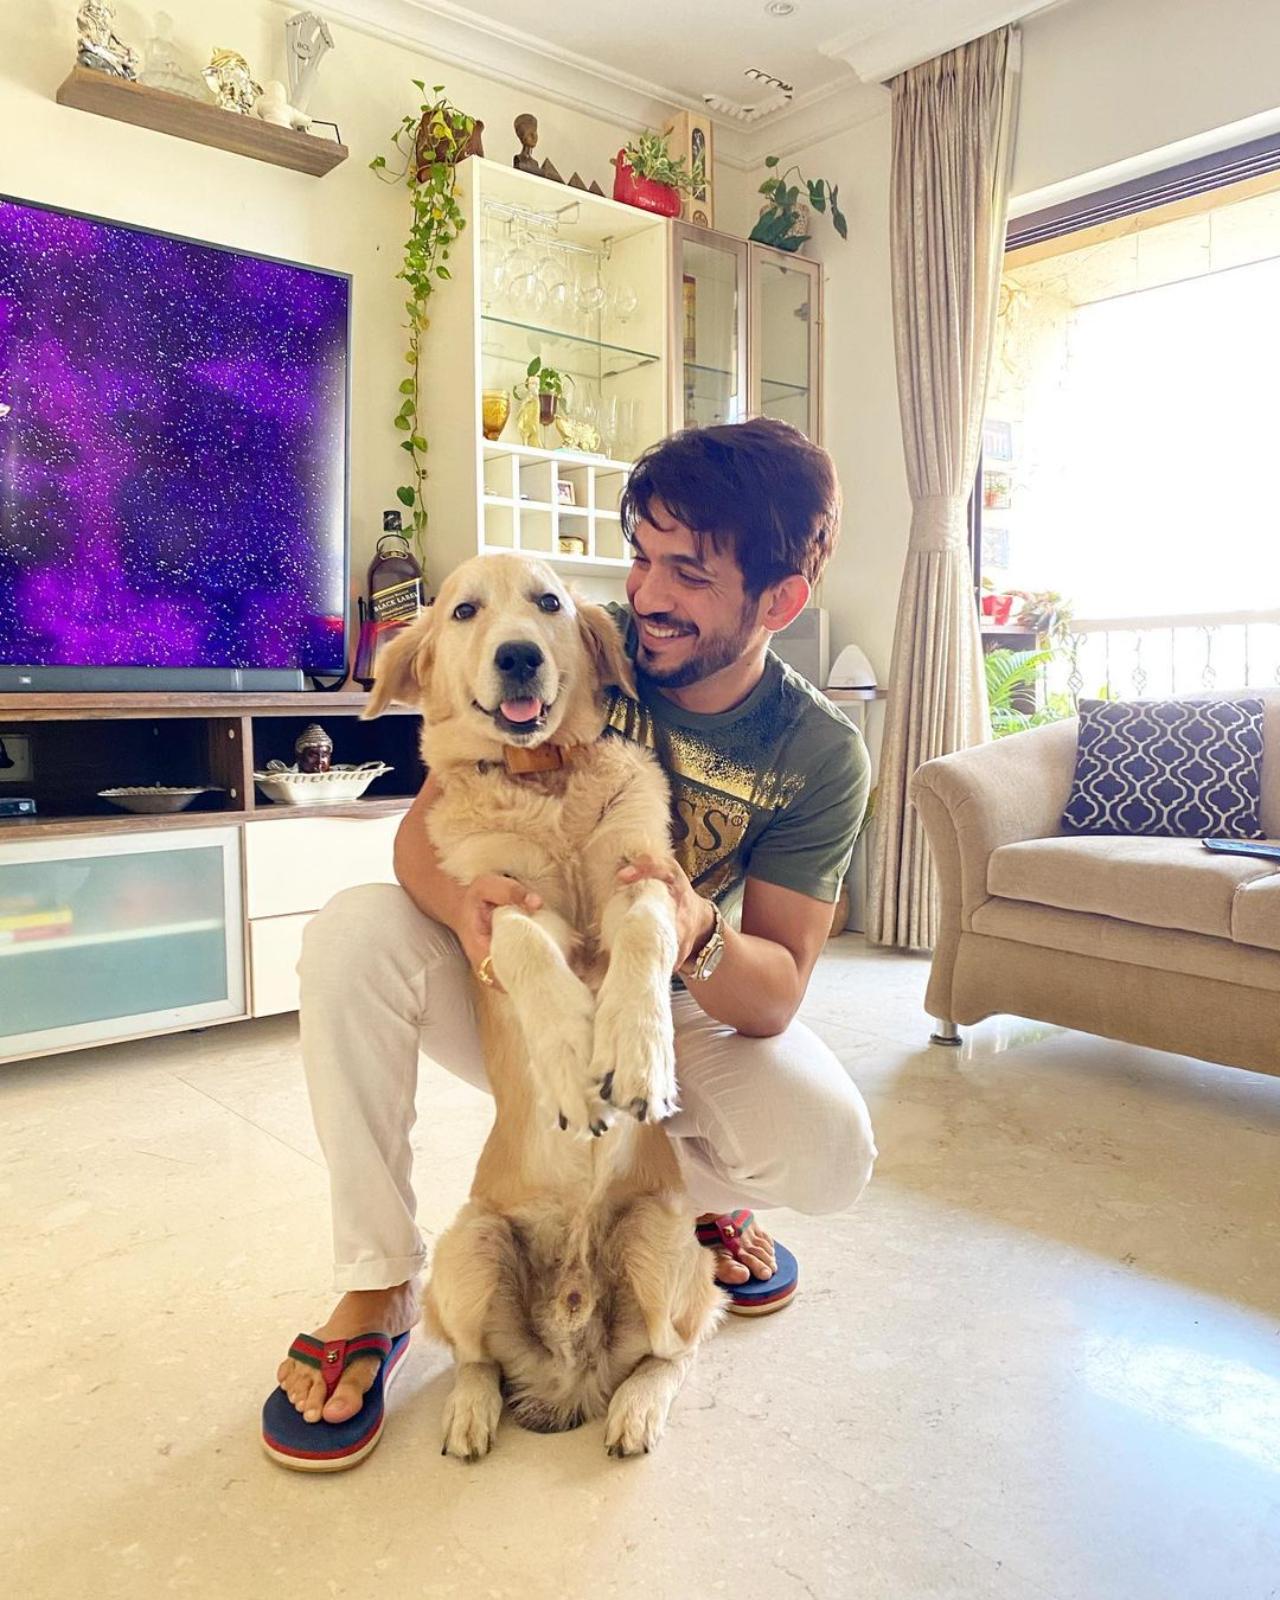 Arjun Bijlani
Arjun Bijlani's affection for dogs knows no bounds, and his beloved golden retriever, Boozy, holds a special place as his most cherished companion